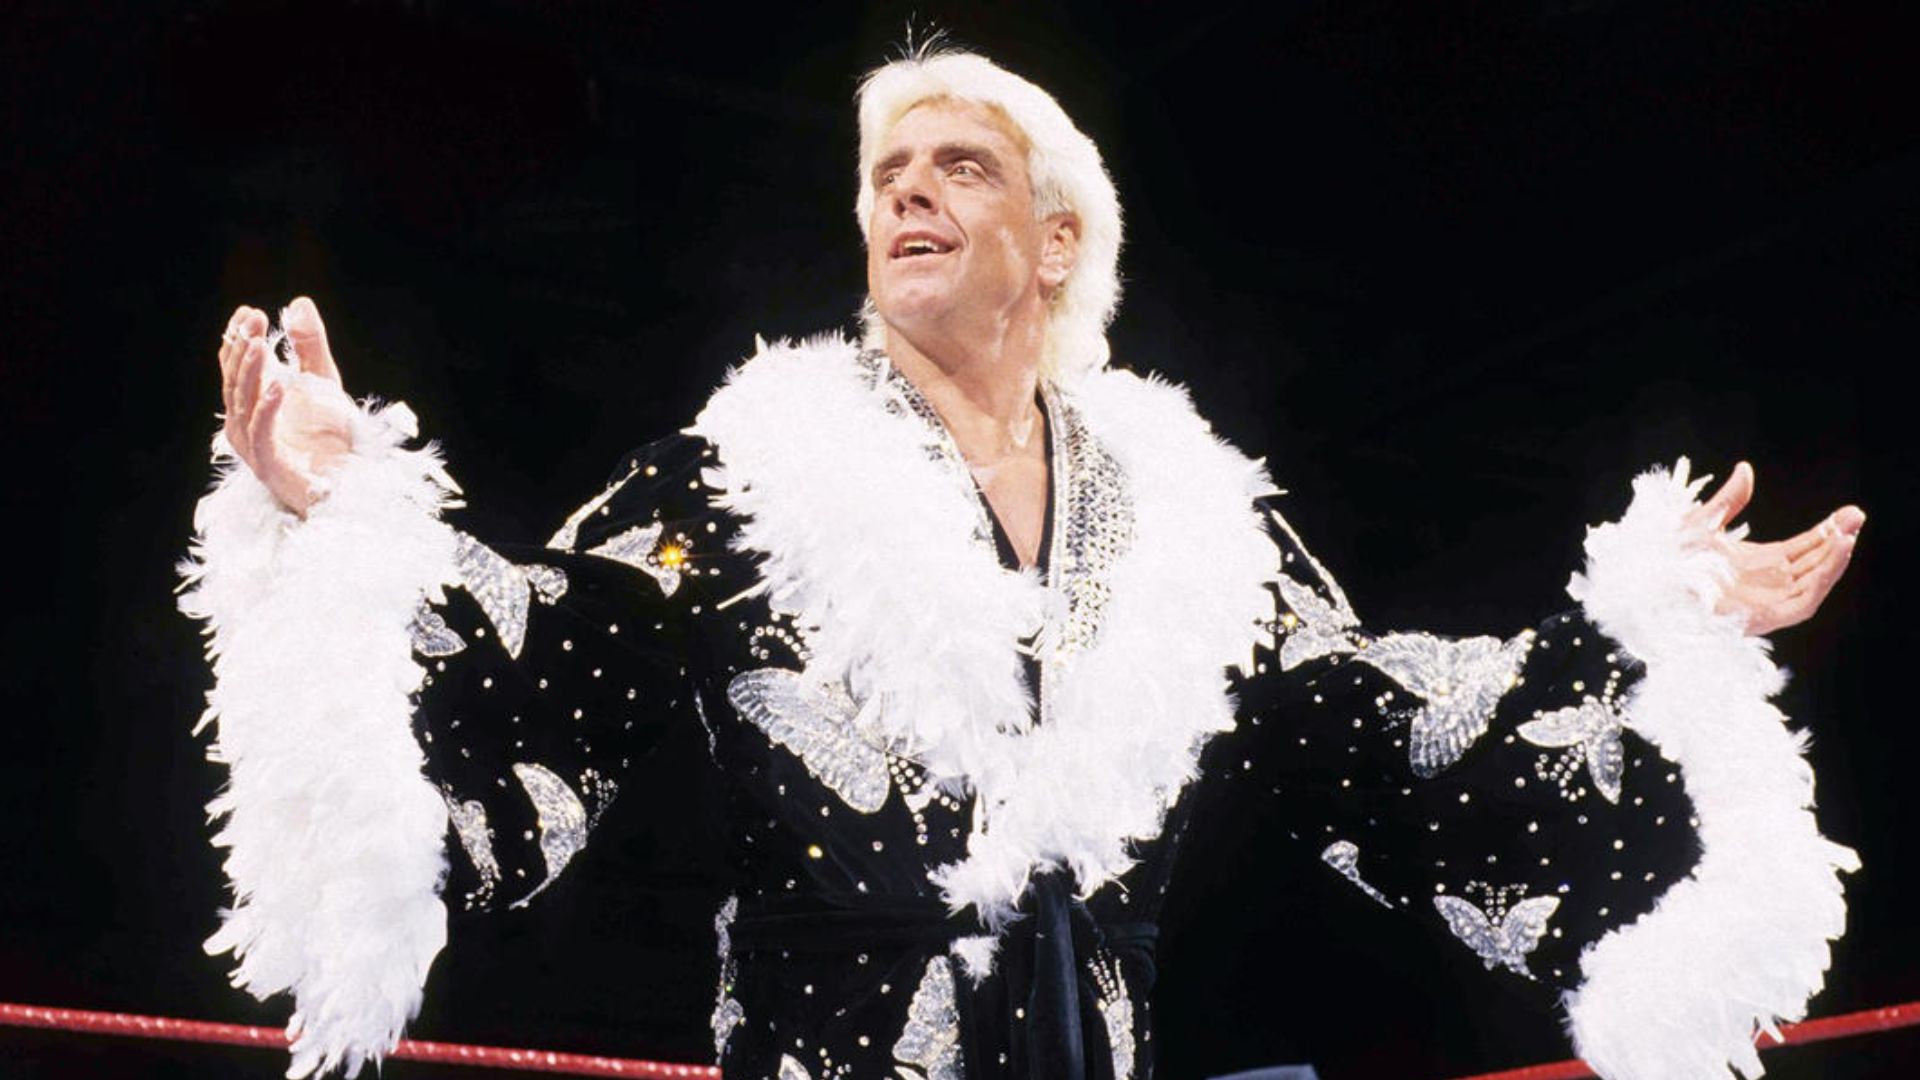 Rick Flair Hands Wide Spreaded